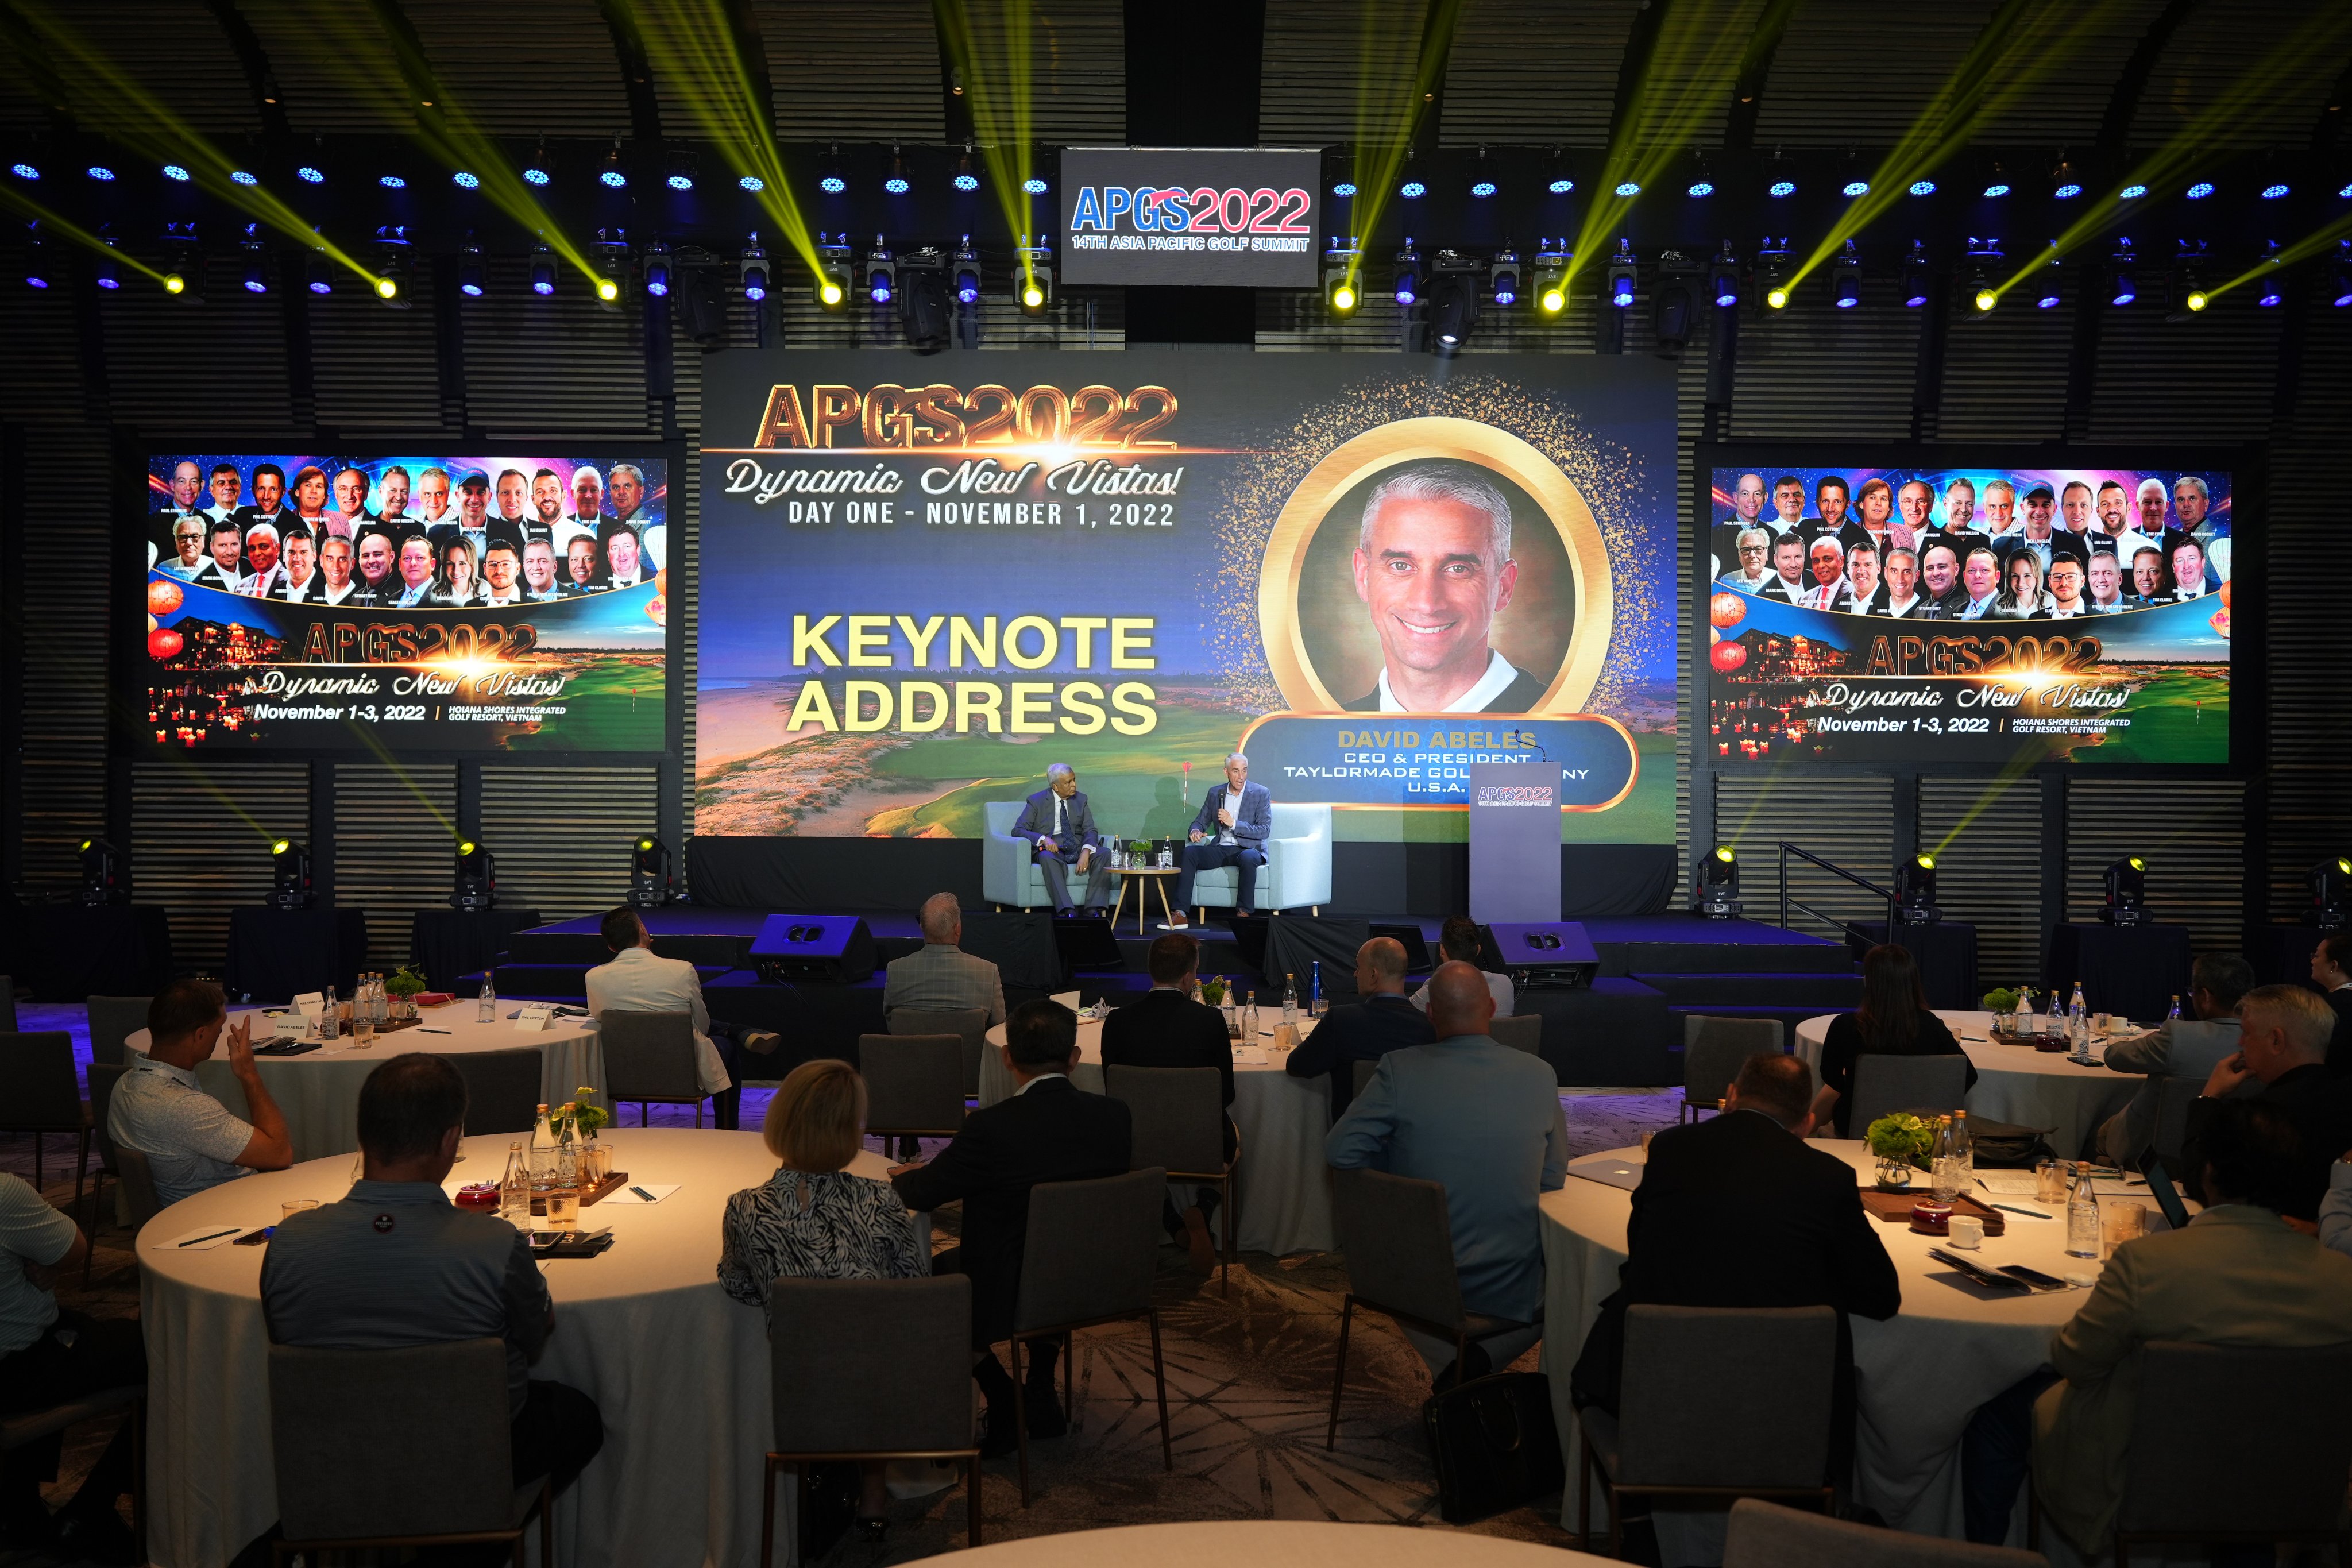 Keynote address delivered by the President and CEO of TaylorMade Golf, David Abeles